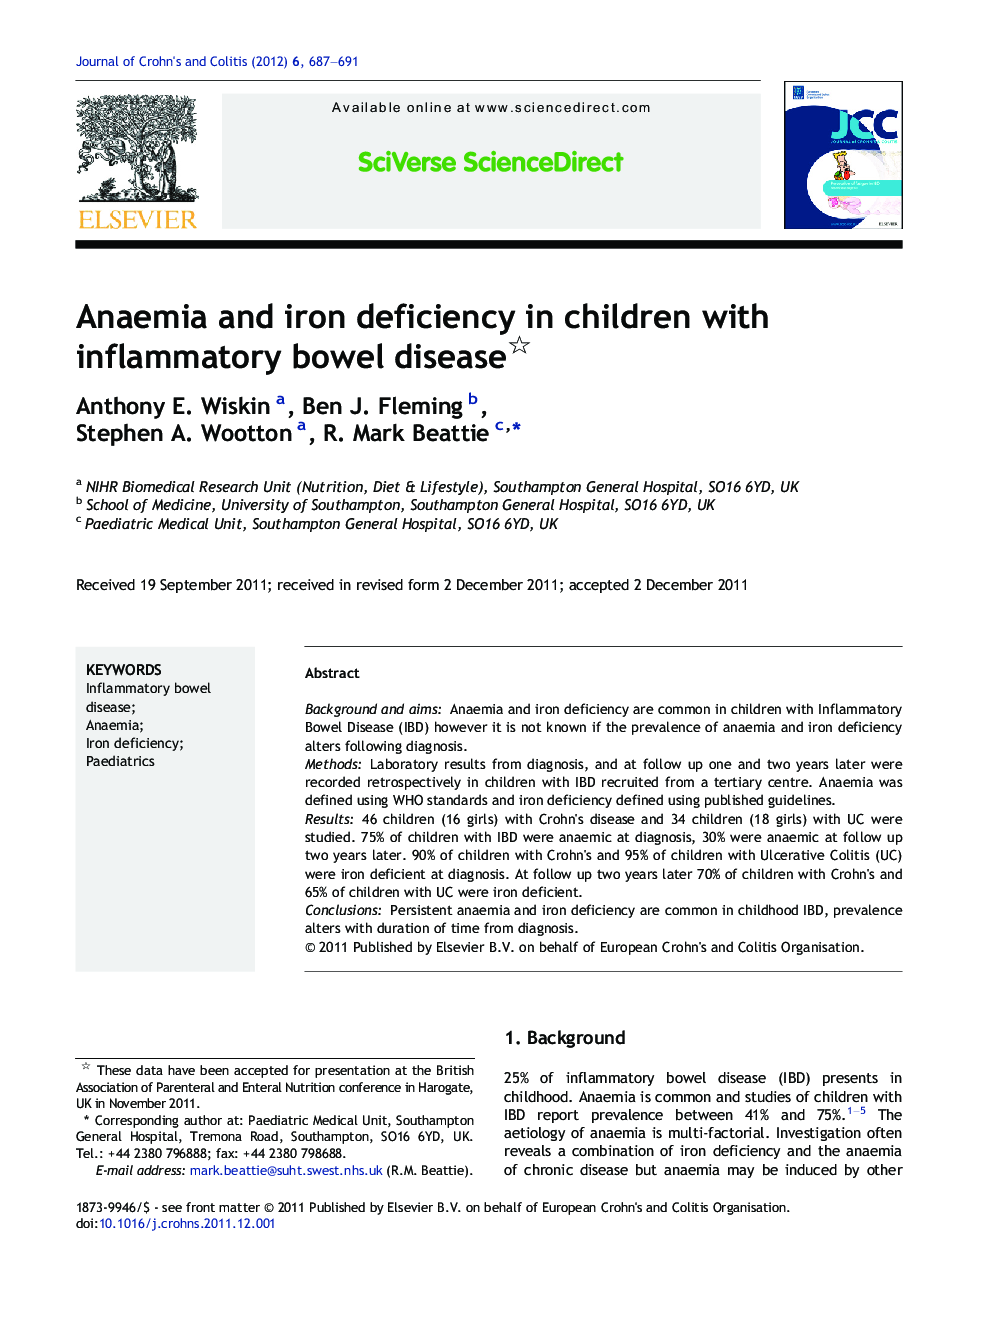 Anaemia and iron deficiency in children with inflammatory bowel disease